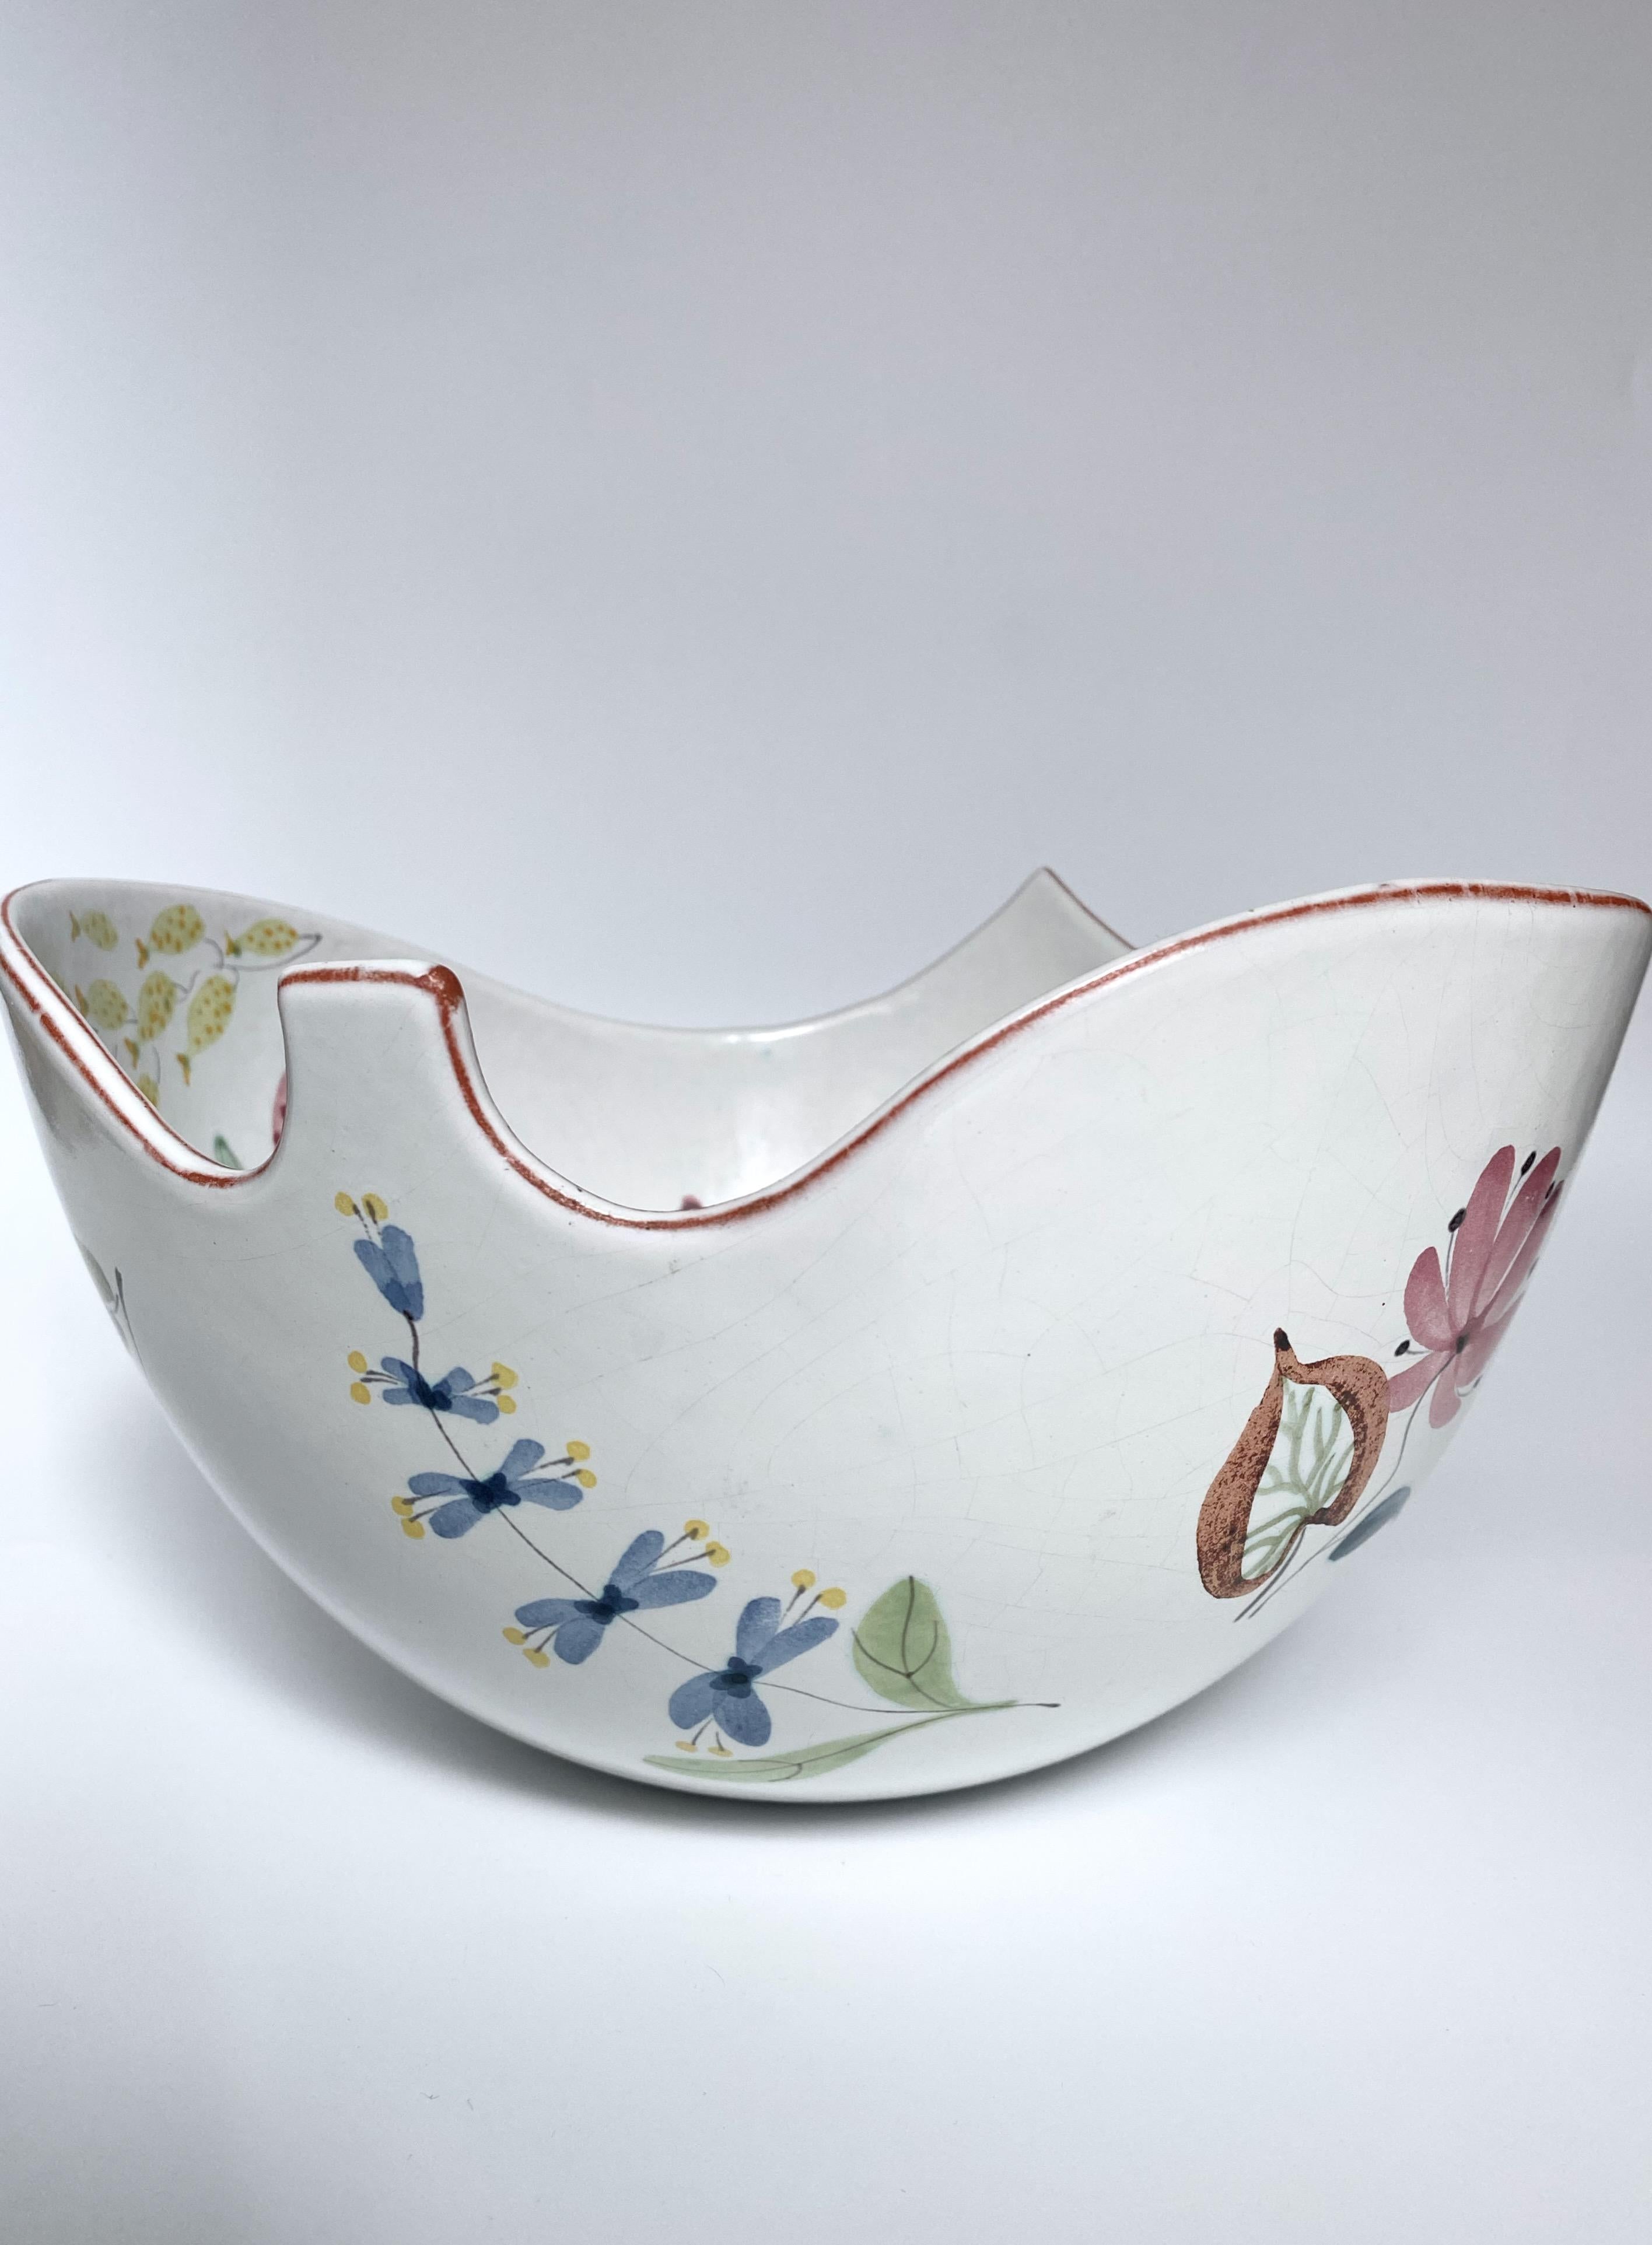 Scandinavian Modern Large Faience Ceramic Bowl and Plate by Stig Lindberg for Gustavsberg For Sale